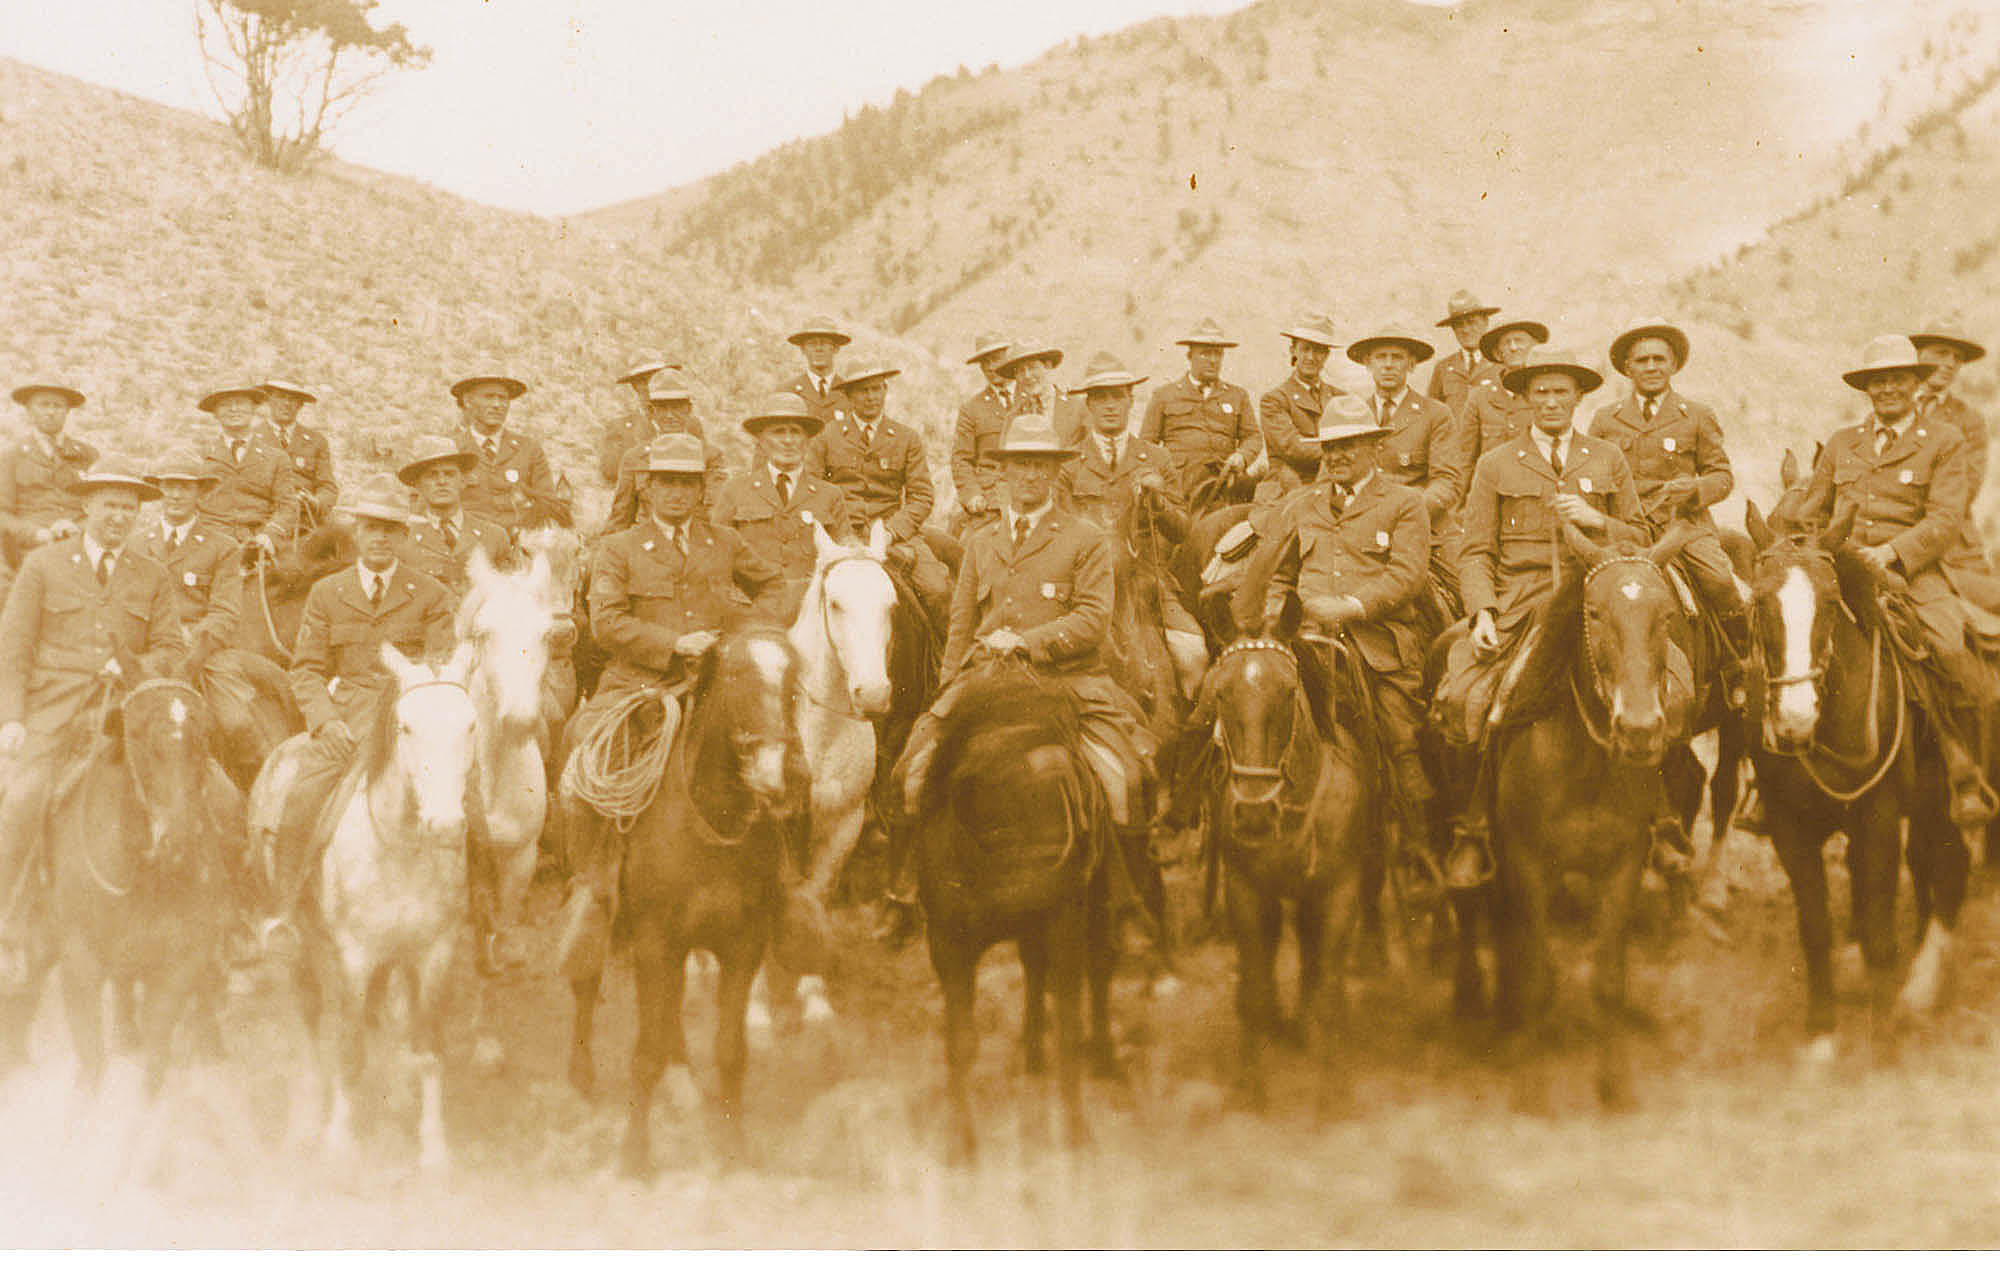 Twenty-seven men and one woman in NPS uniforms and broad brim hats pose on horses. Most wear shield-shaped badges.